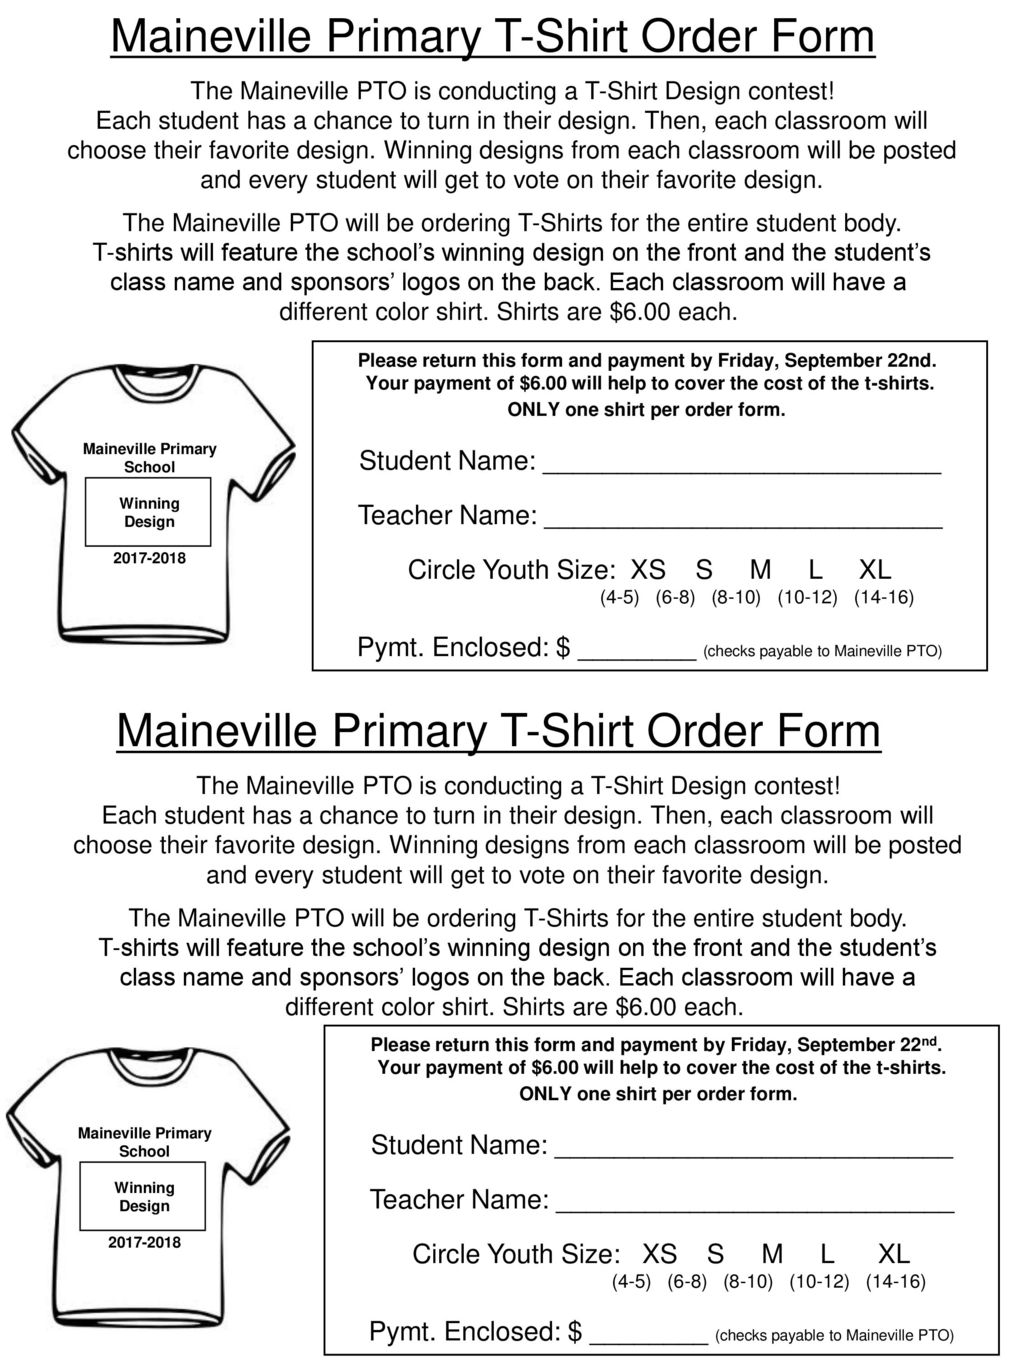 Maineville Primary T-Shirt Order Form - ppt download